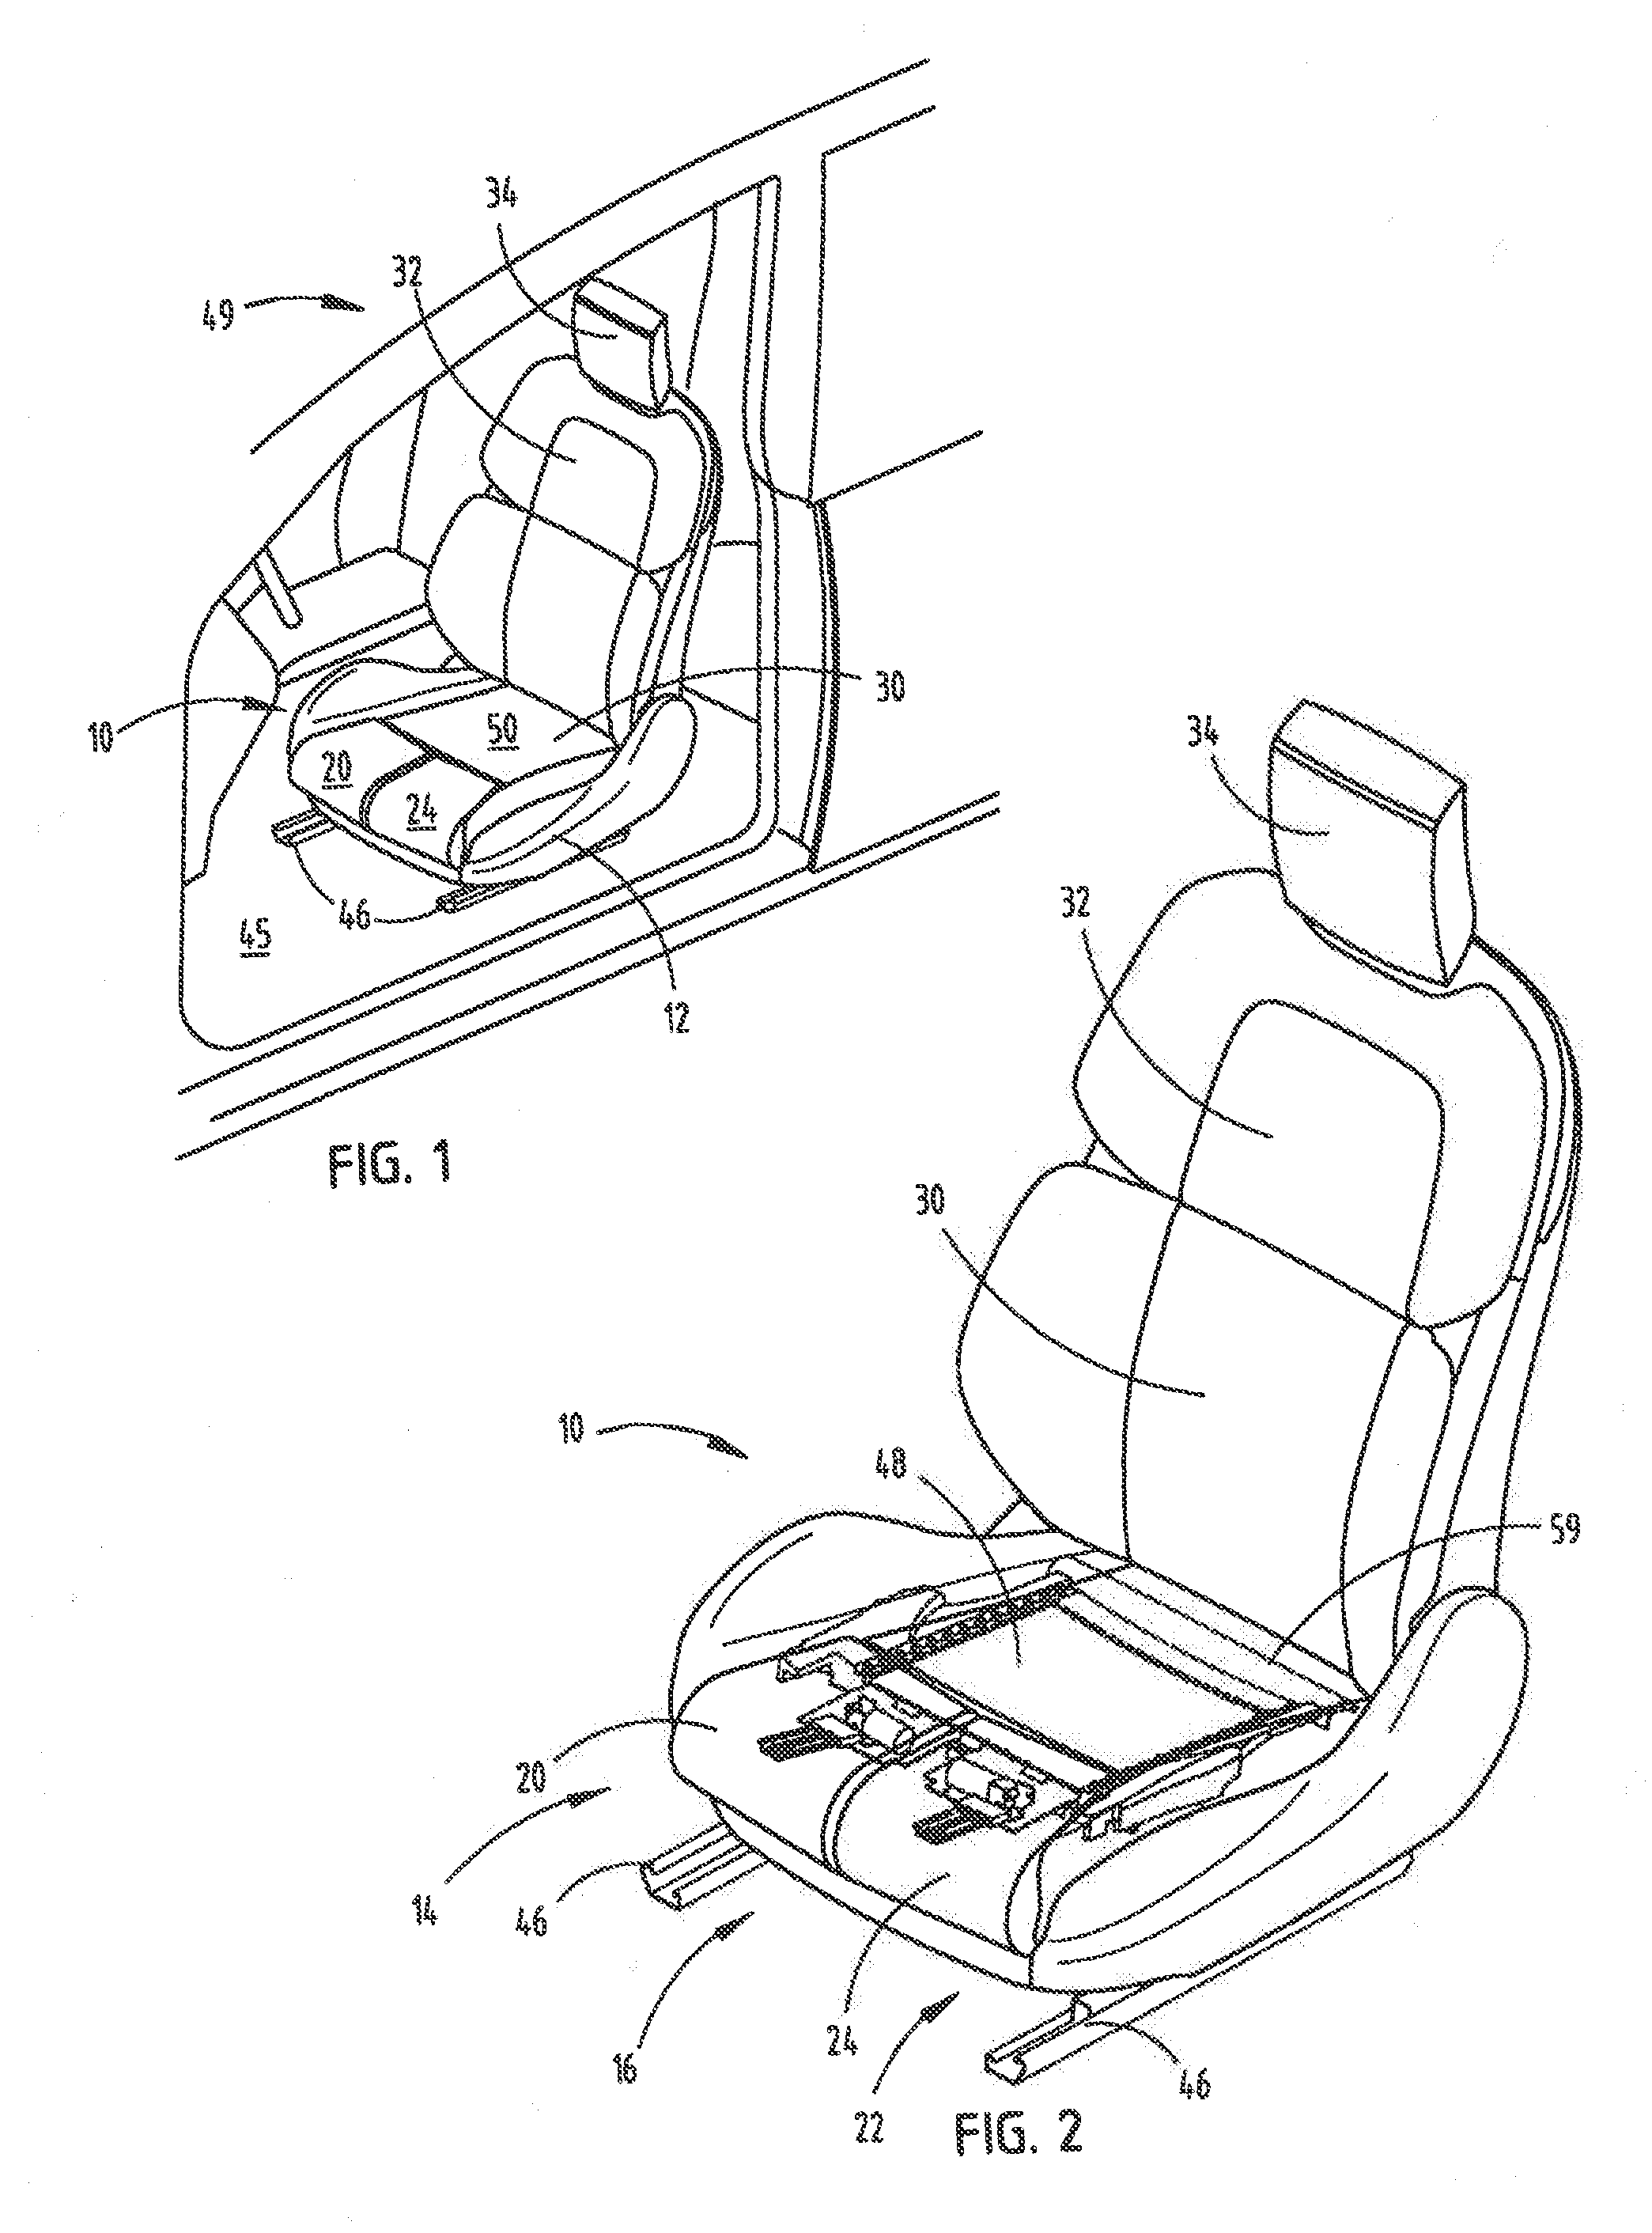 Independent cushion extension with optimized leg-splay angle